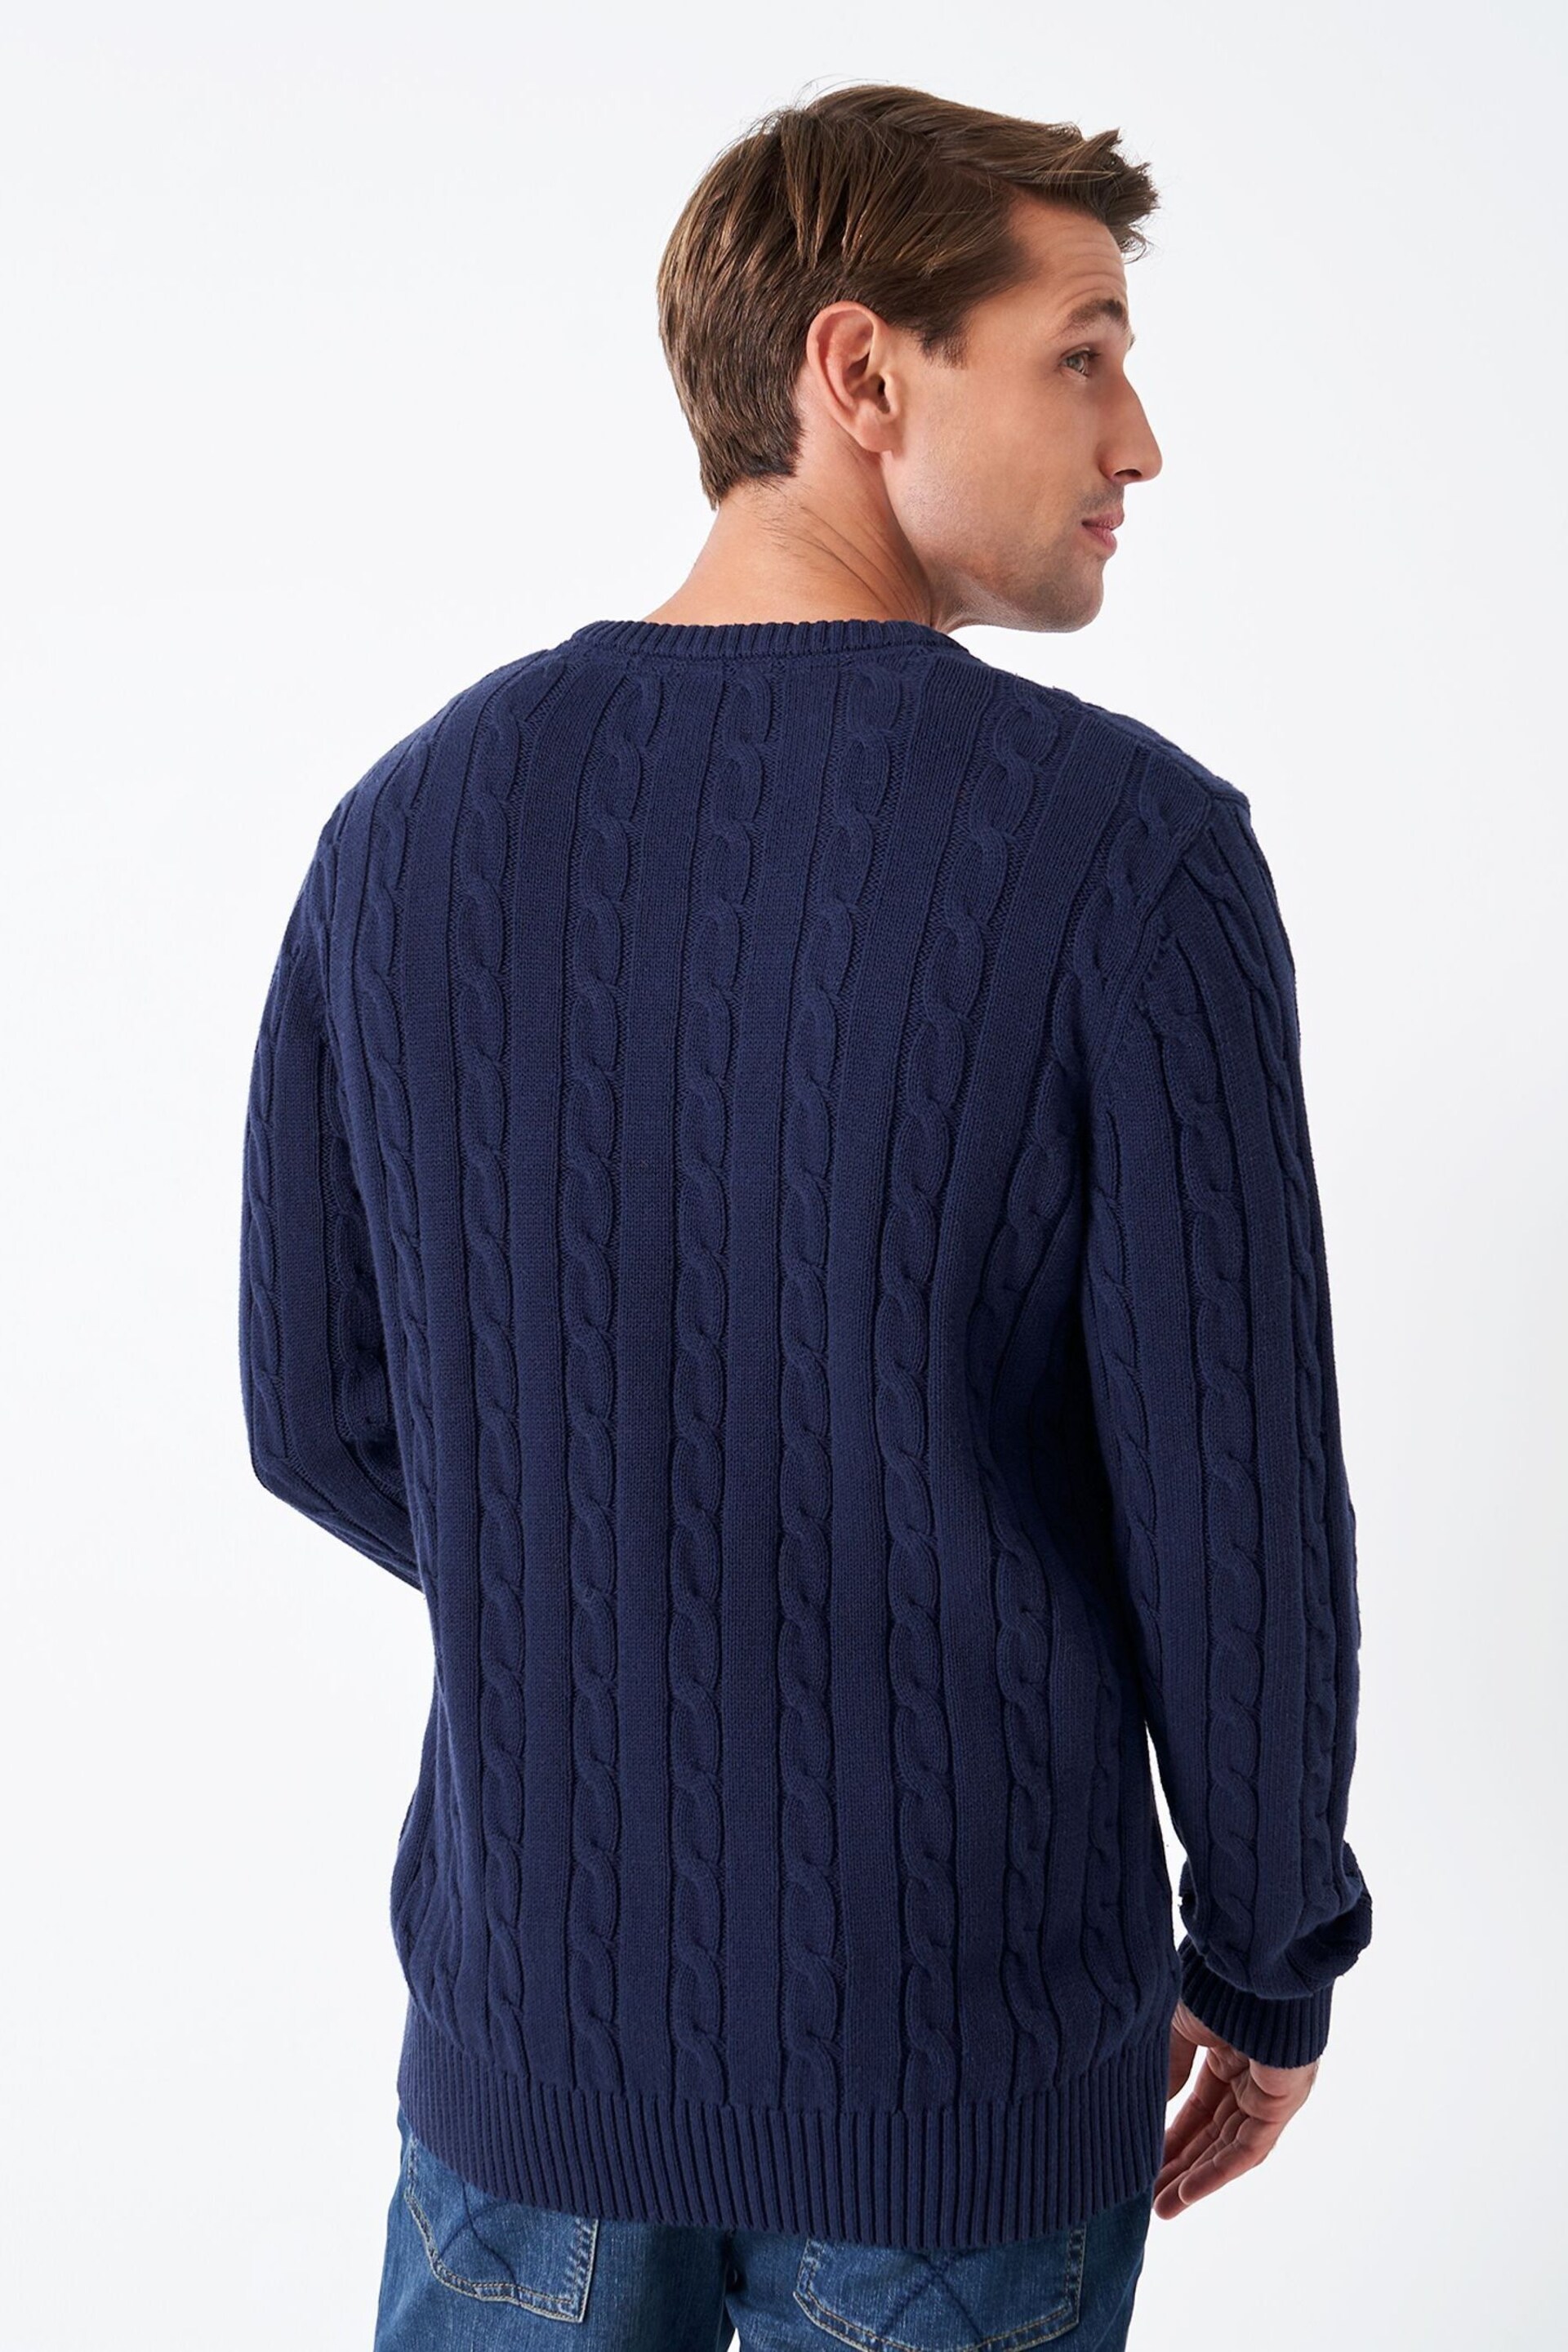 Crew Clothing Cotton Classic Jumper - Image 2 of 5